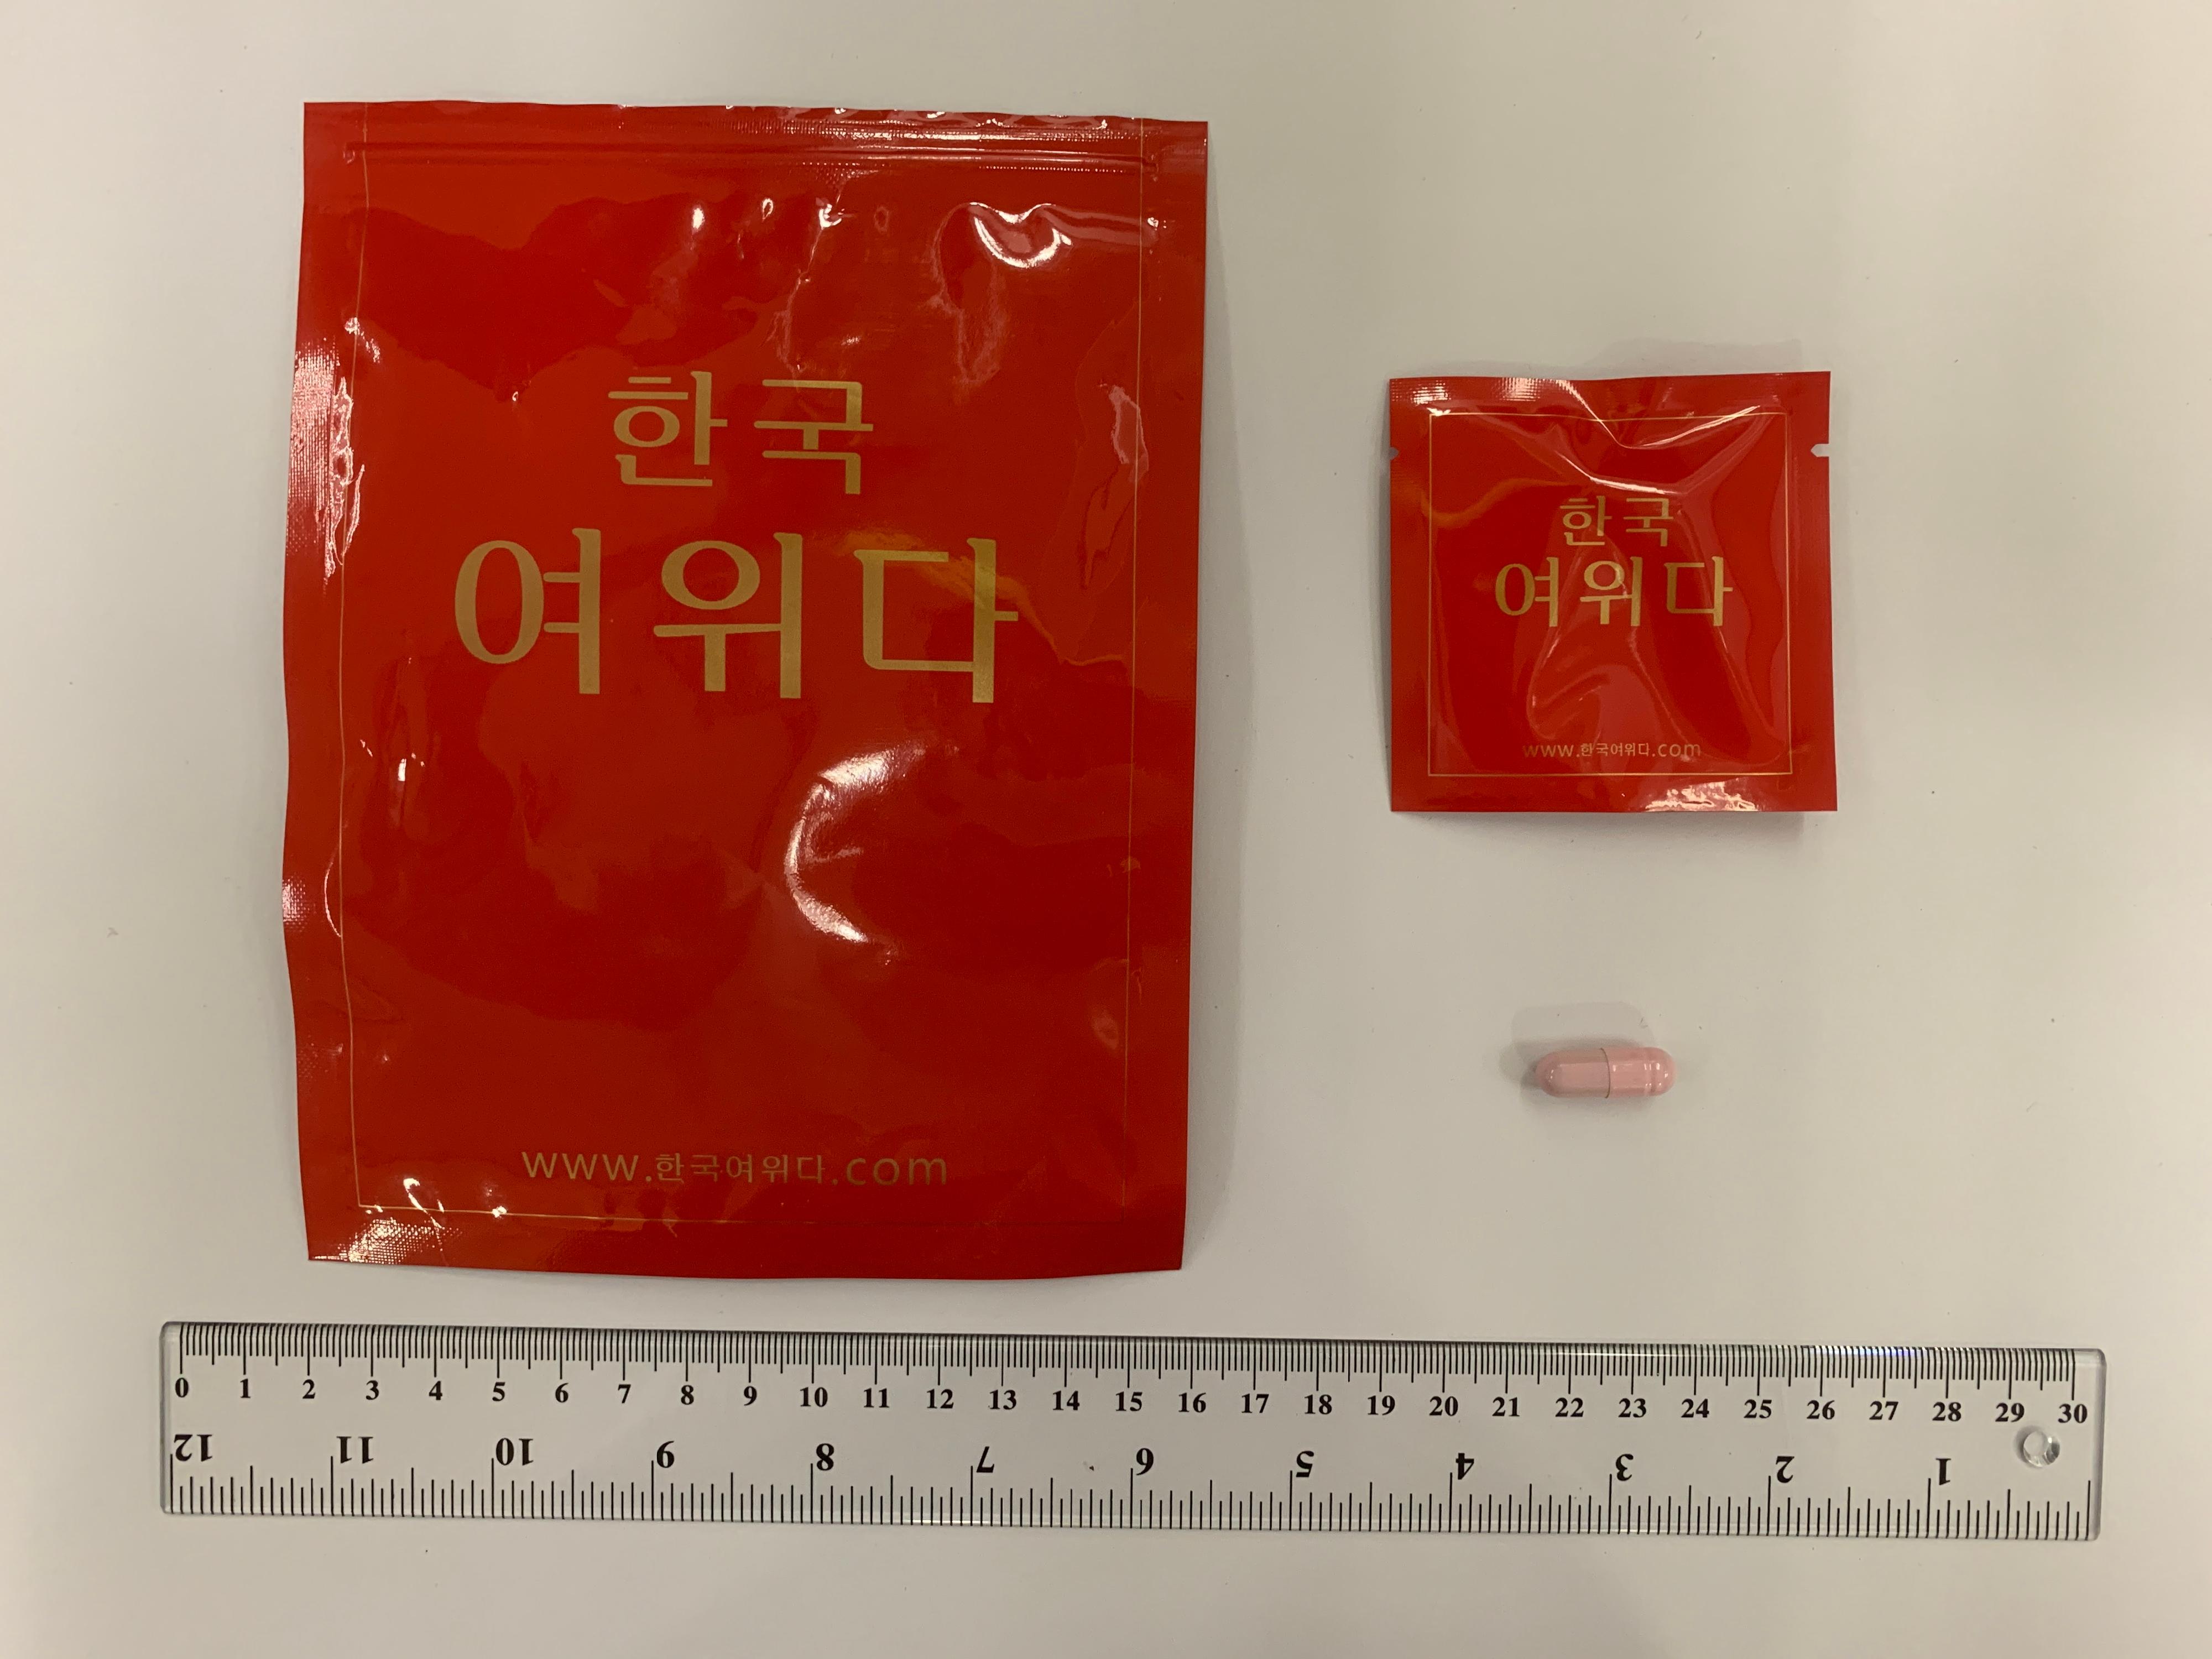 The Department of Health today (March 21) appealed to the public not to buy or consume a slimming product with a Korean name, as it was found to contain an undeclared controlled and banned drug ingredient. Photo shows the aforementioned slimming product.
